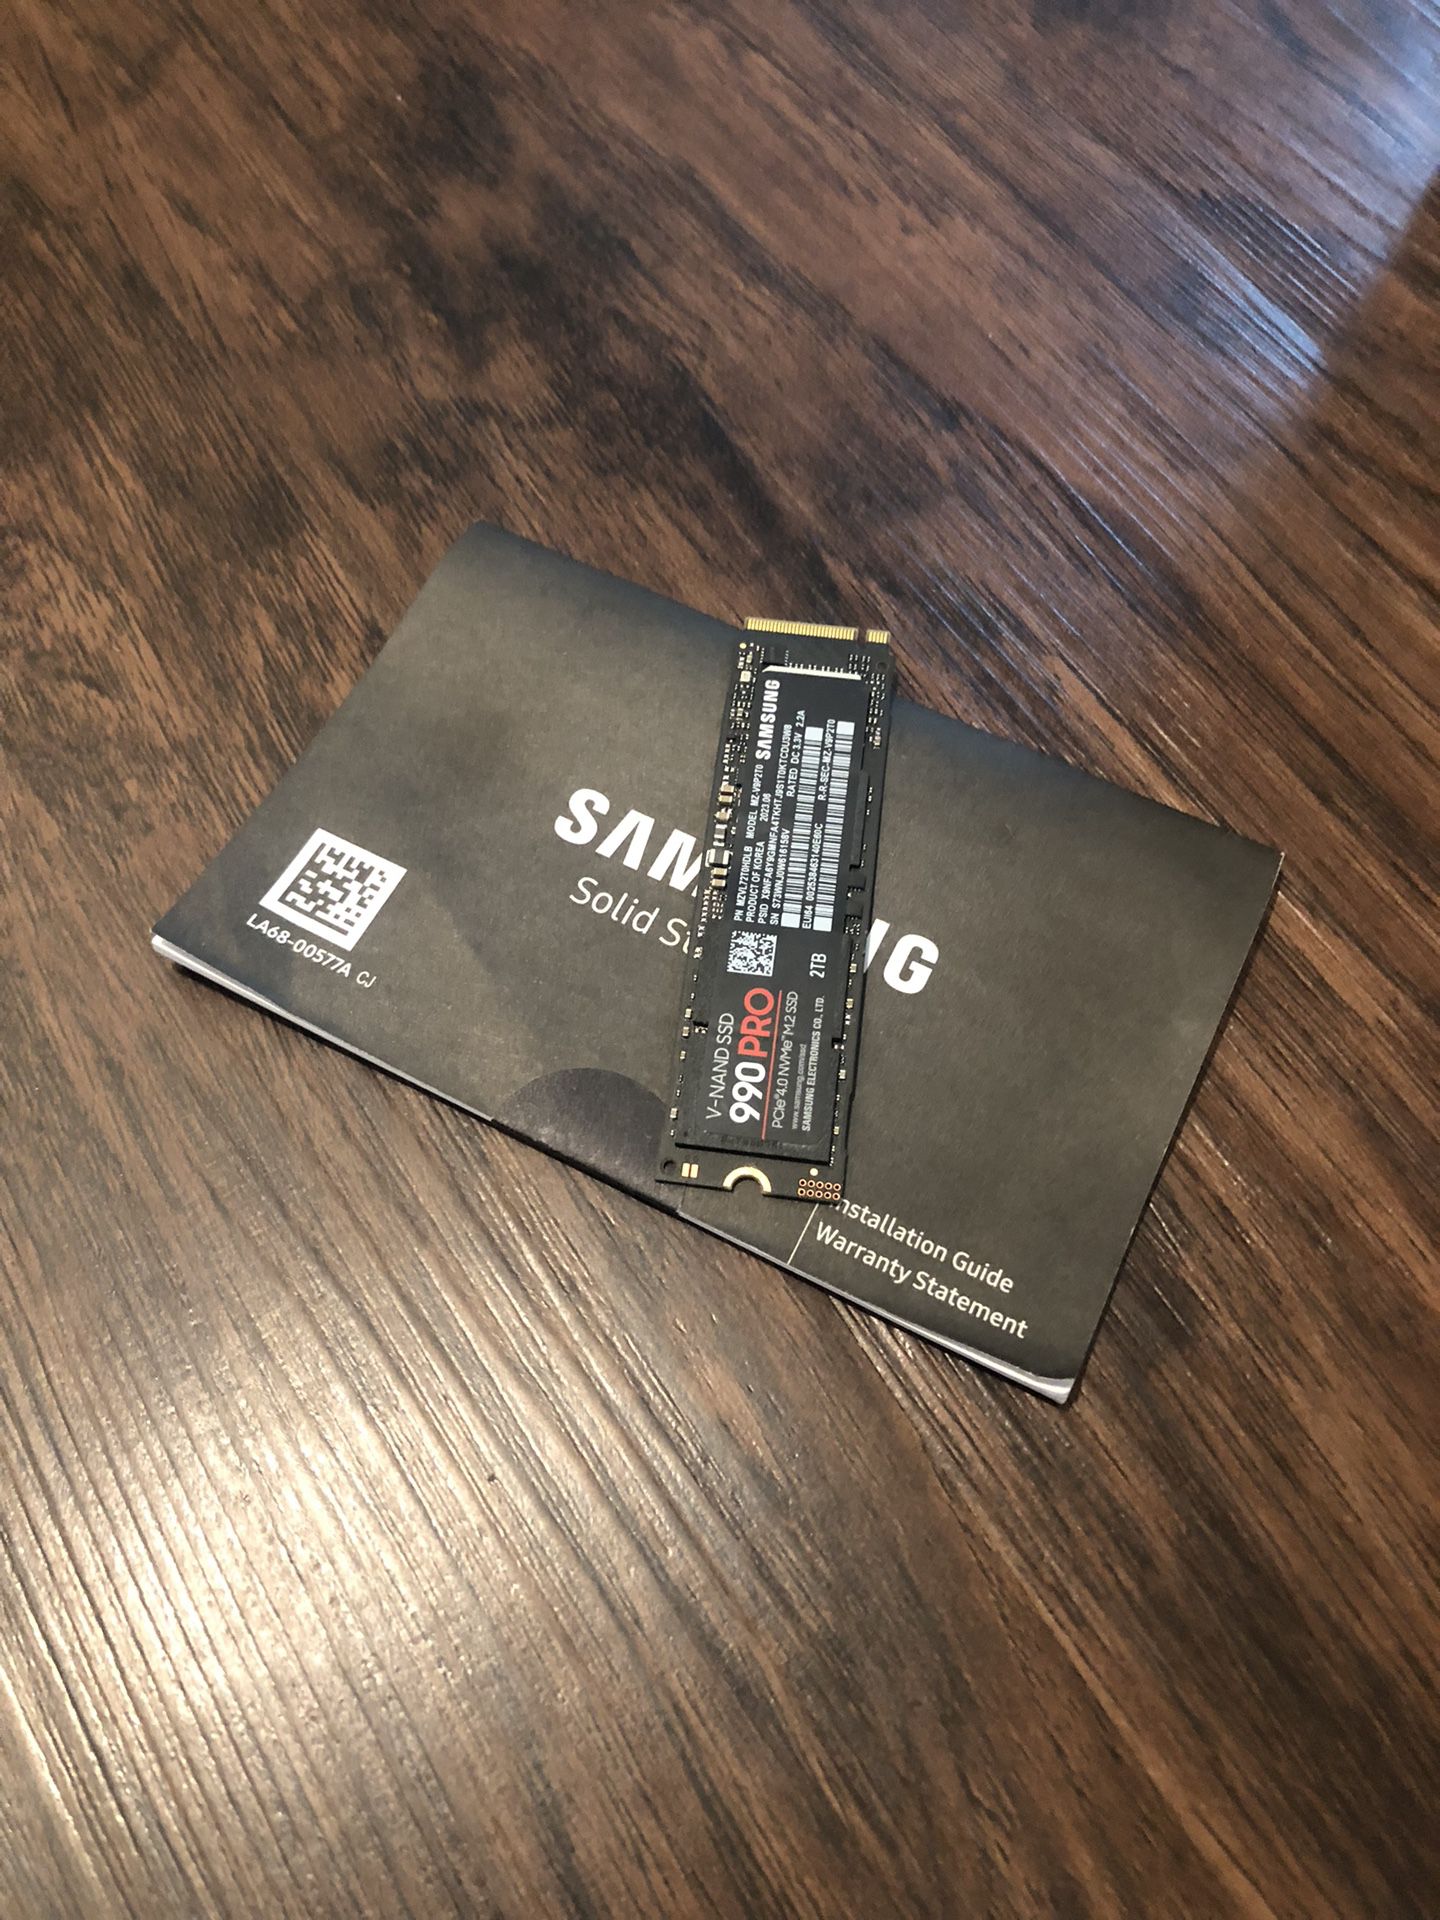 Samsung 990 Pro 2TB PCIe Gen4. NVMe M.2 READ DESCRIPTION NO BOX📦PICK UP ONLY NO TRADE 👉FIRM ON PRICE👈💲100 NO LESS ONLY CASH 💵 